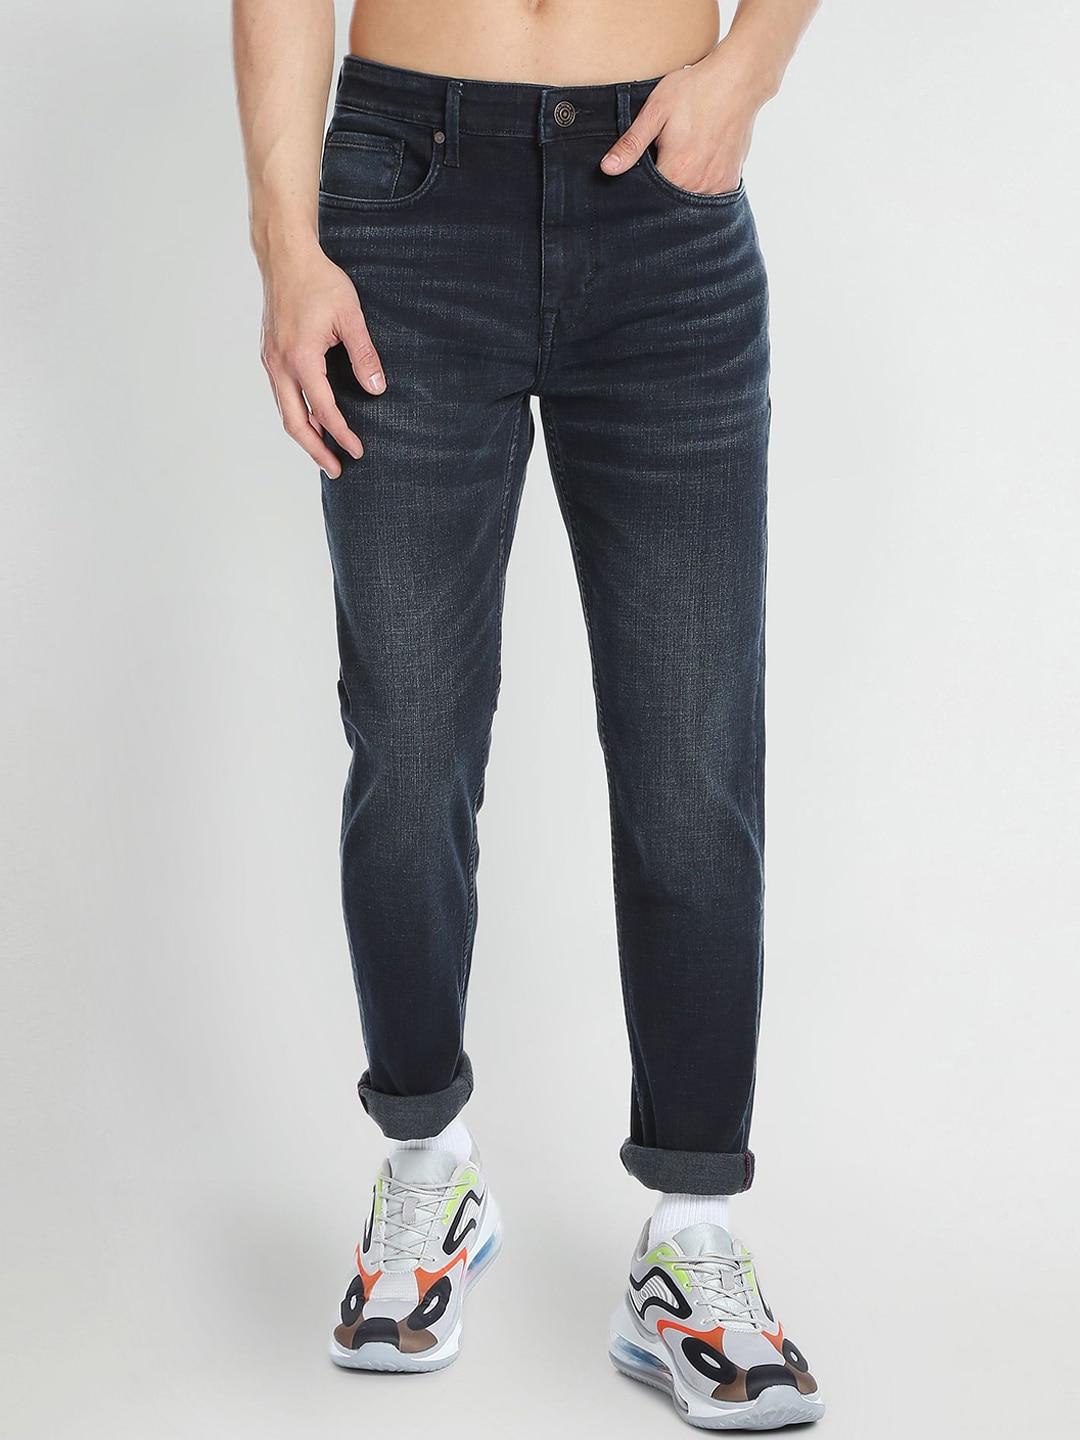 flying-machine-men-tapered-fit-mid-rise-stretchable-jeans